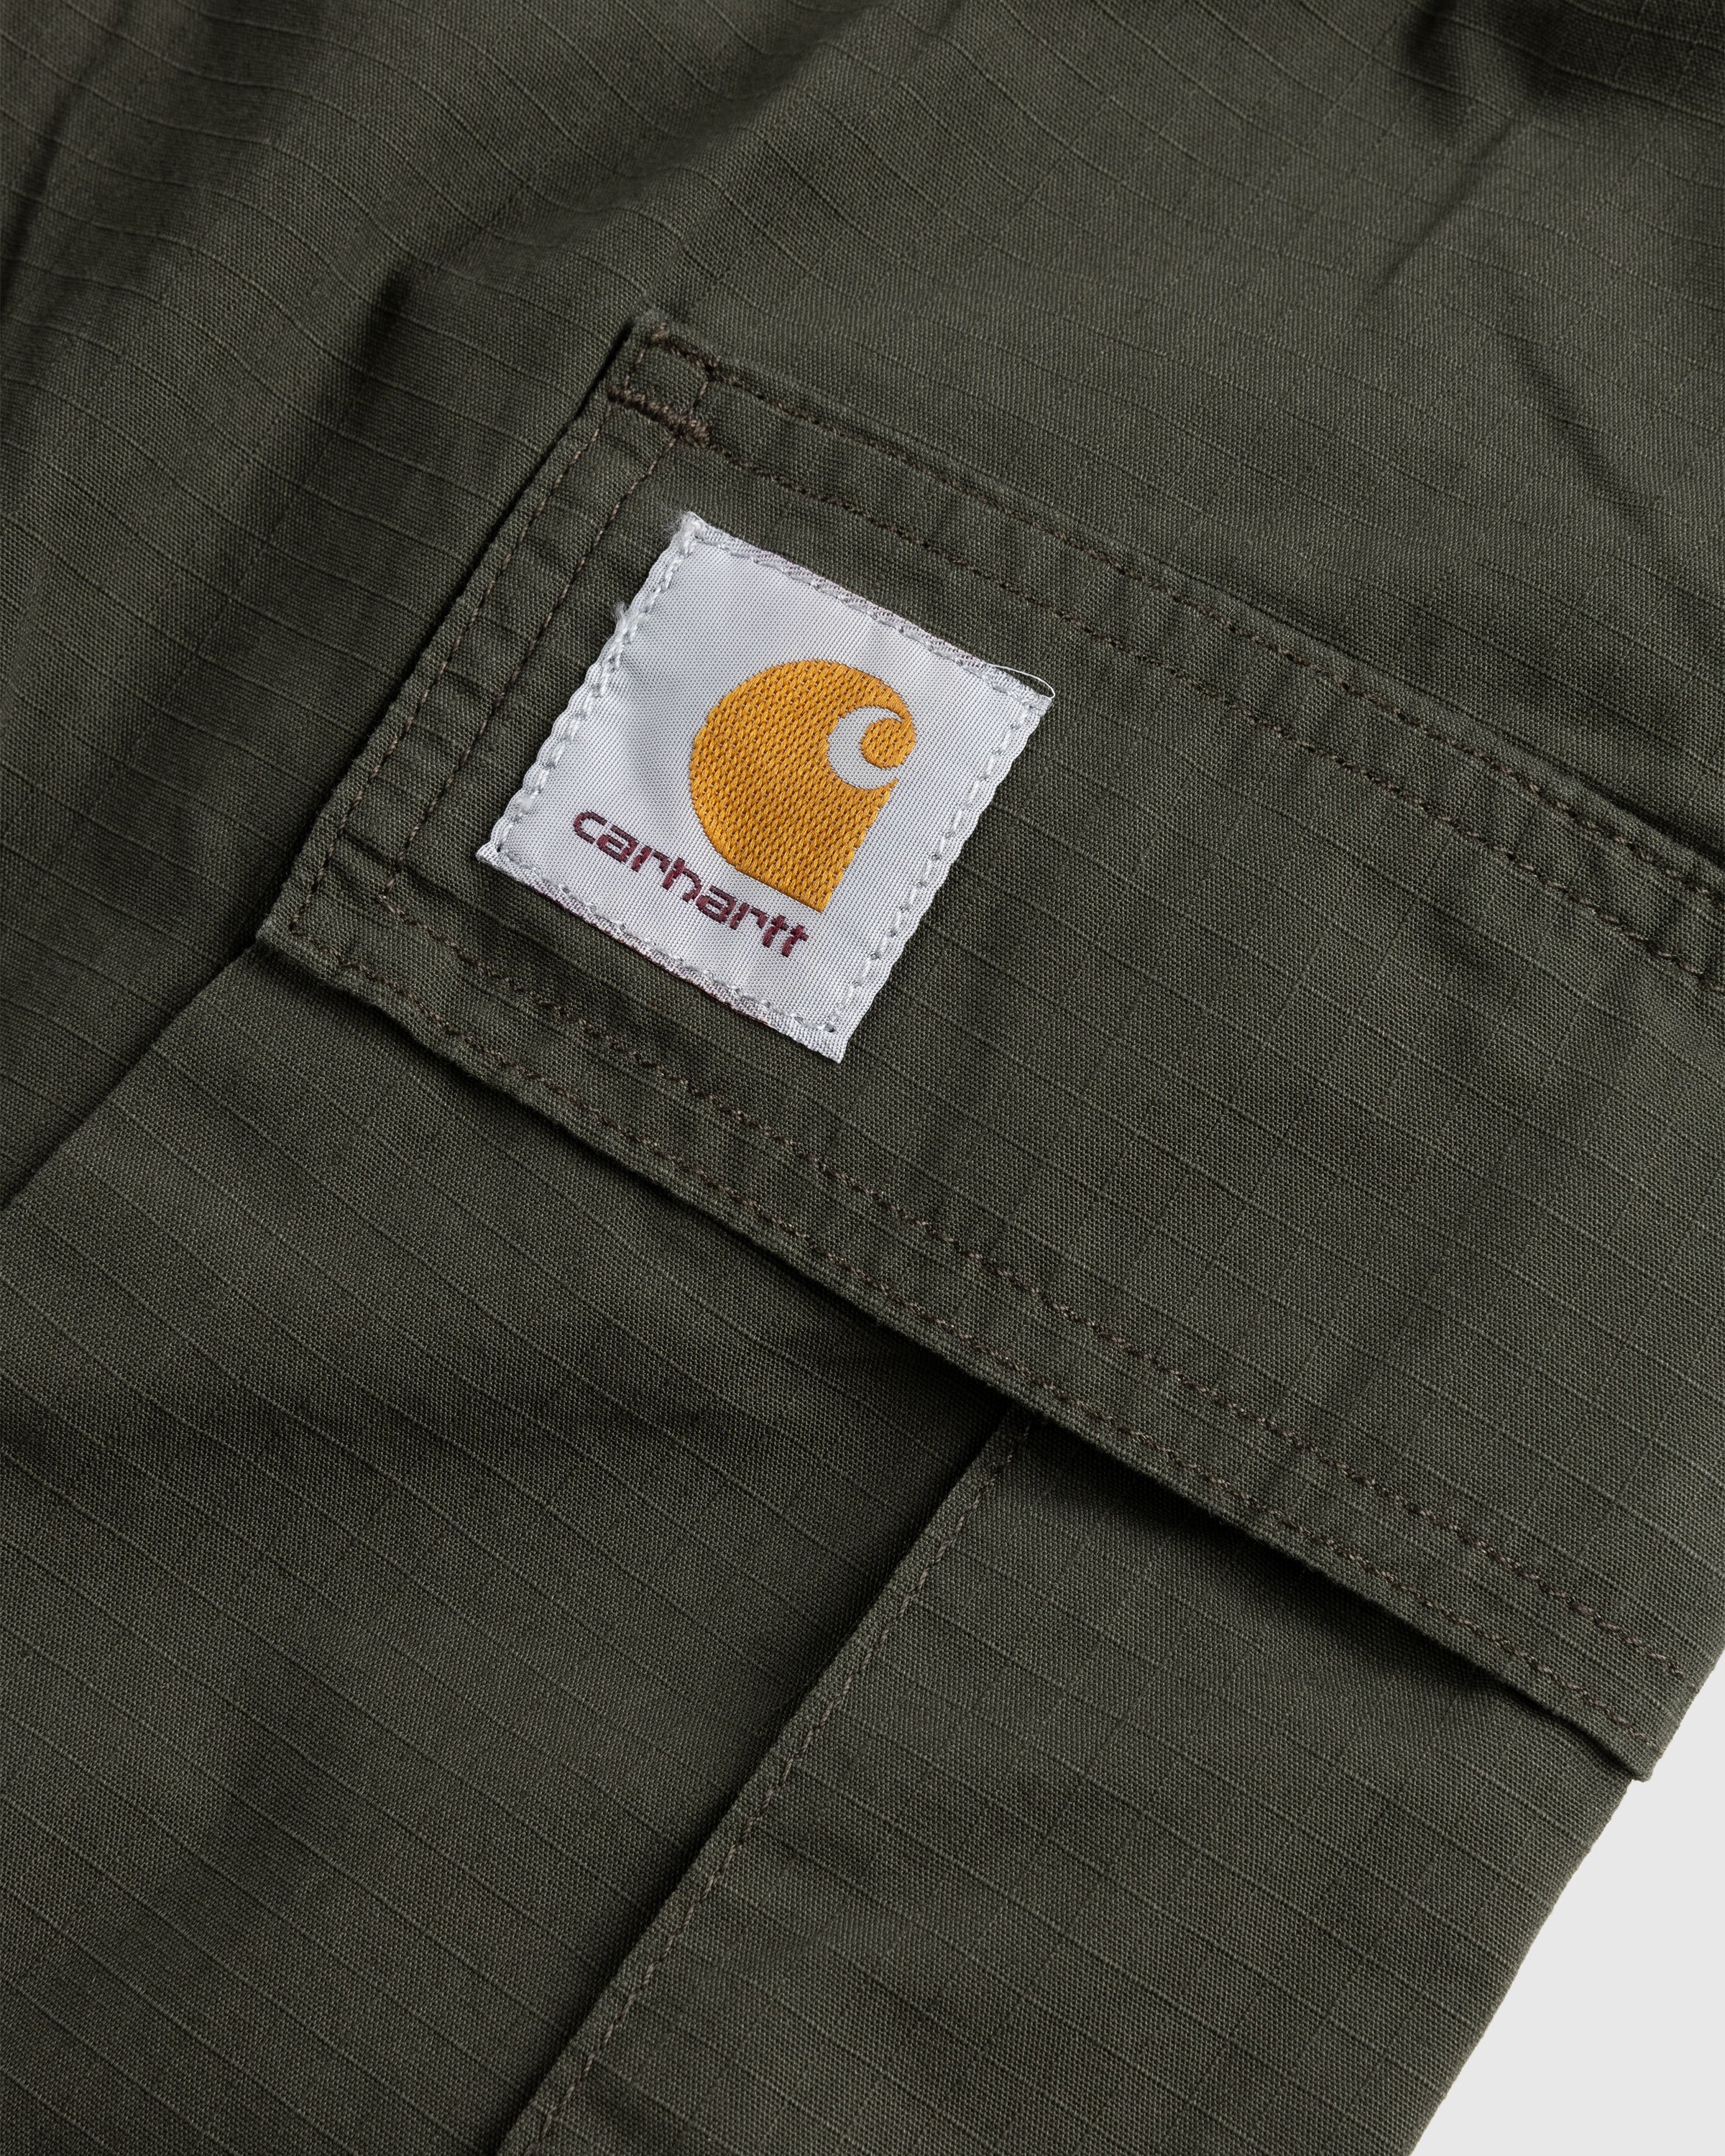 Carhartt WIP - Jet Cargo Pant Cypress/Rinsed - Clothing - Green - Image 5